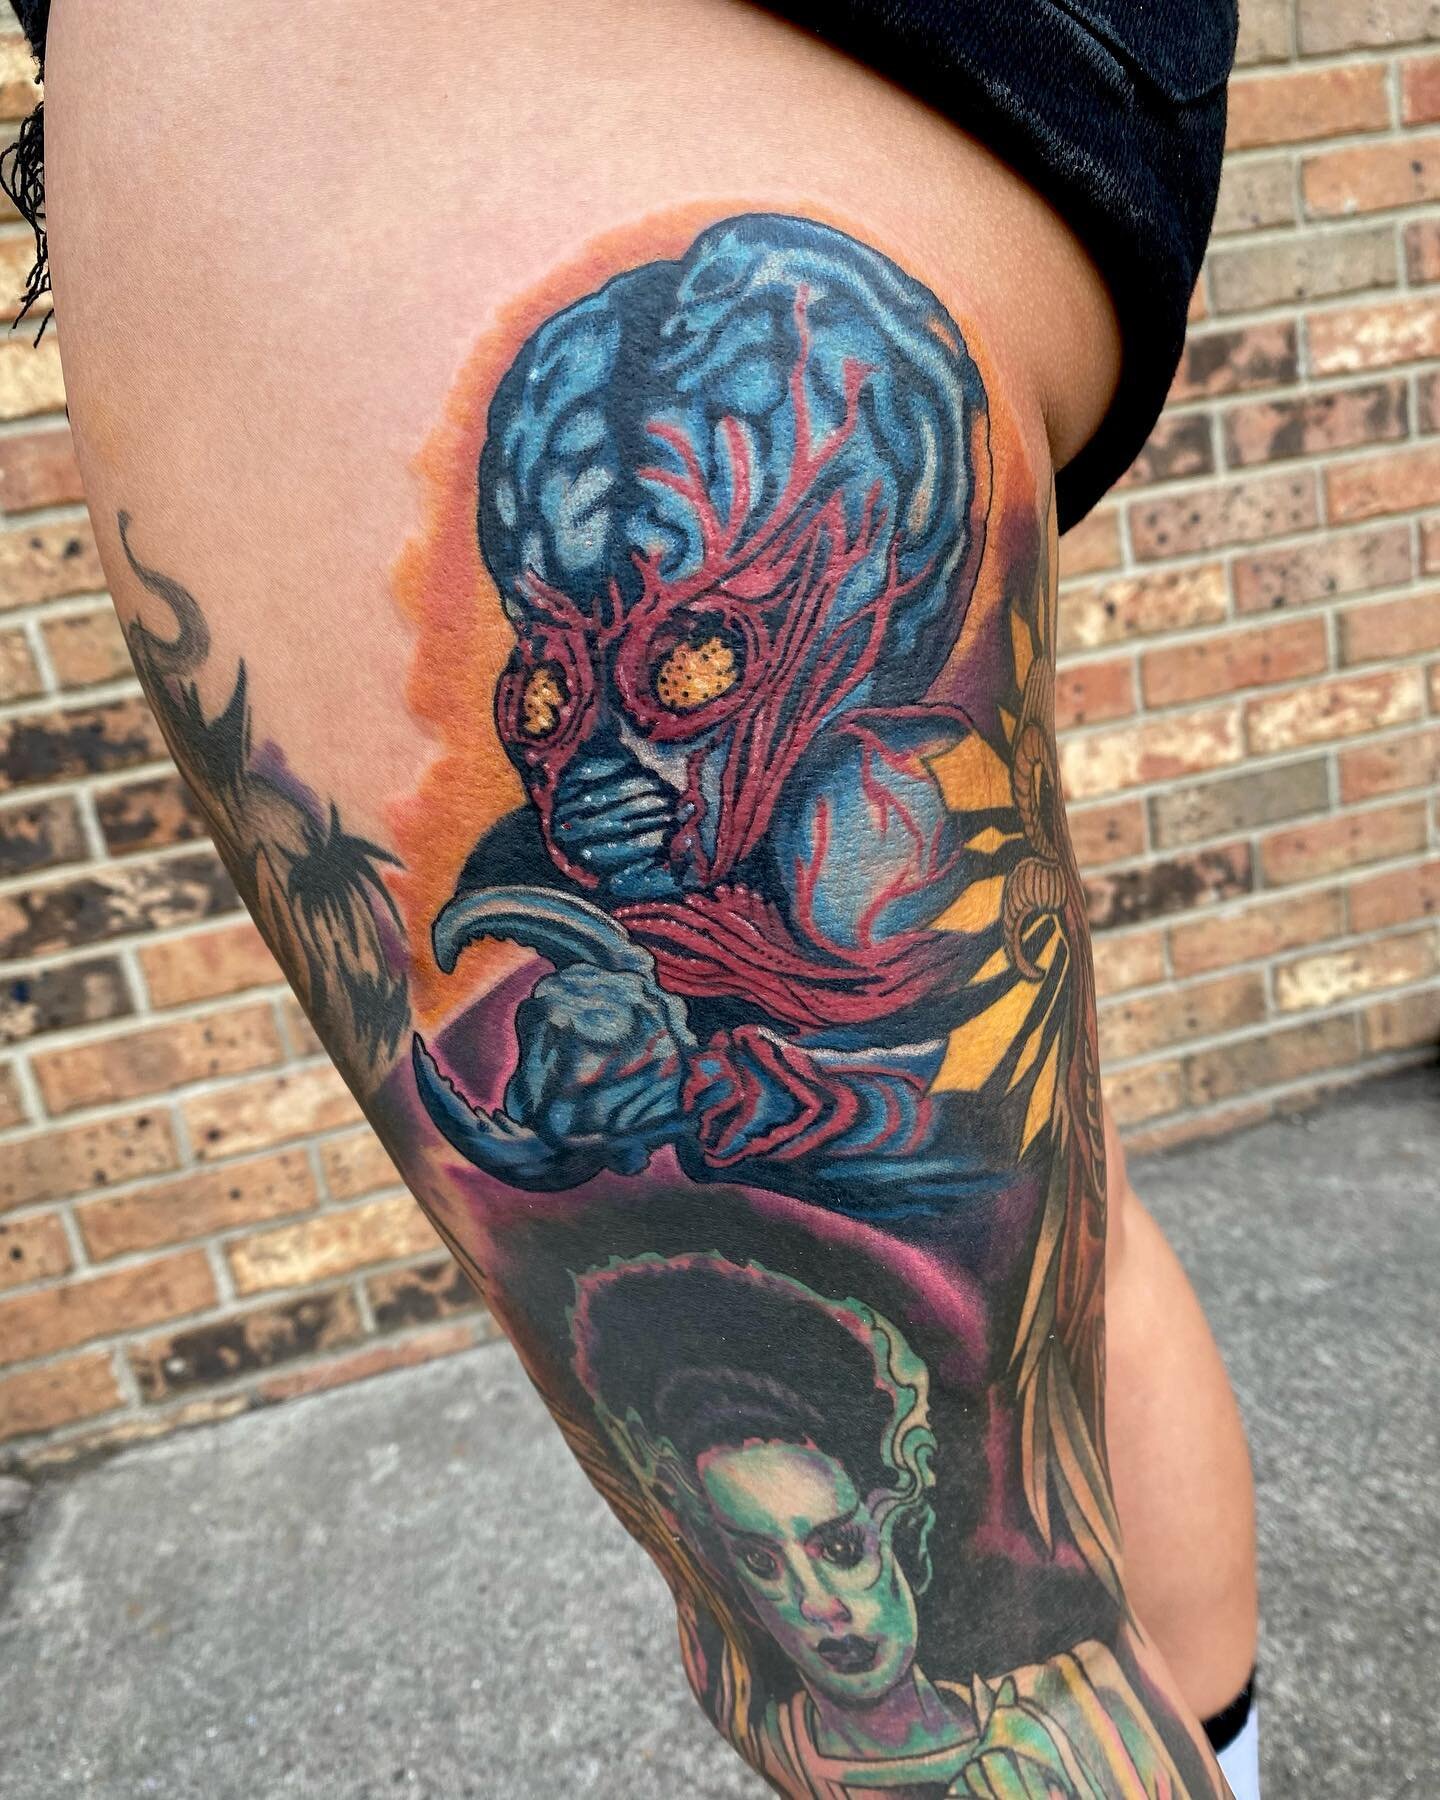 Added this Metaluna Mutant to this very cool leg sleeve I have been chipping away on 👽 @snakeoiltattoo  #horrorsleeve #legsleevetattoo #metalunamutant #kentuckytattooers